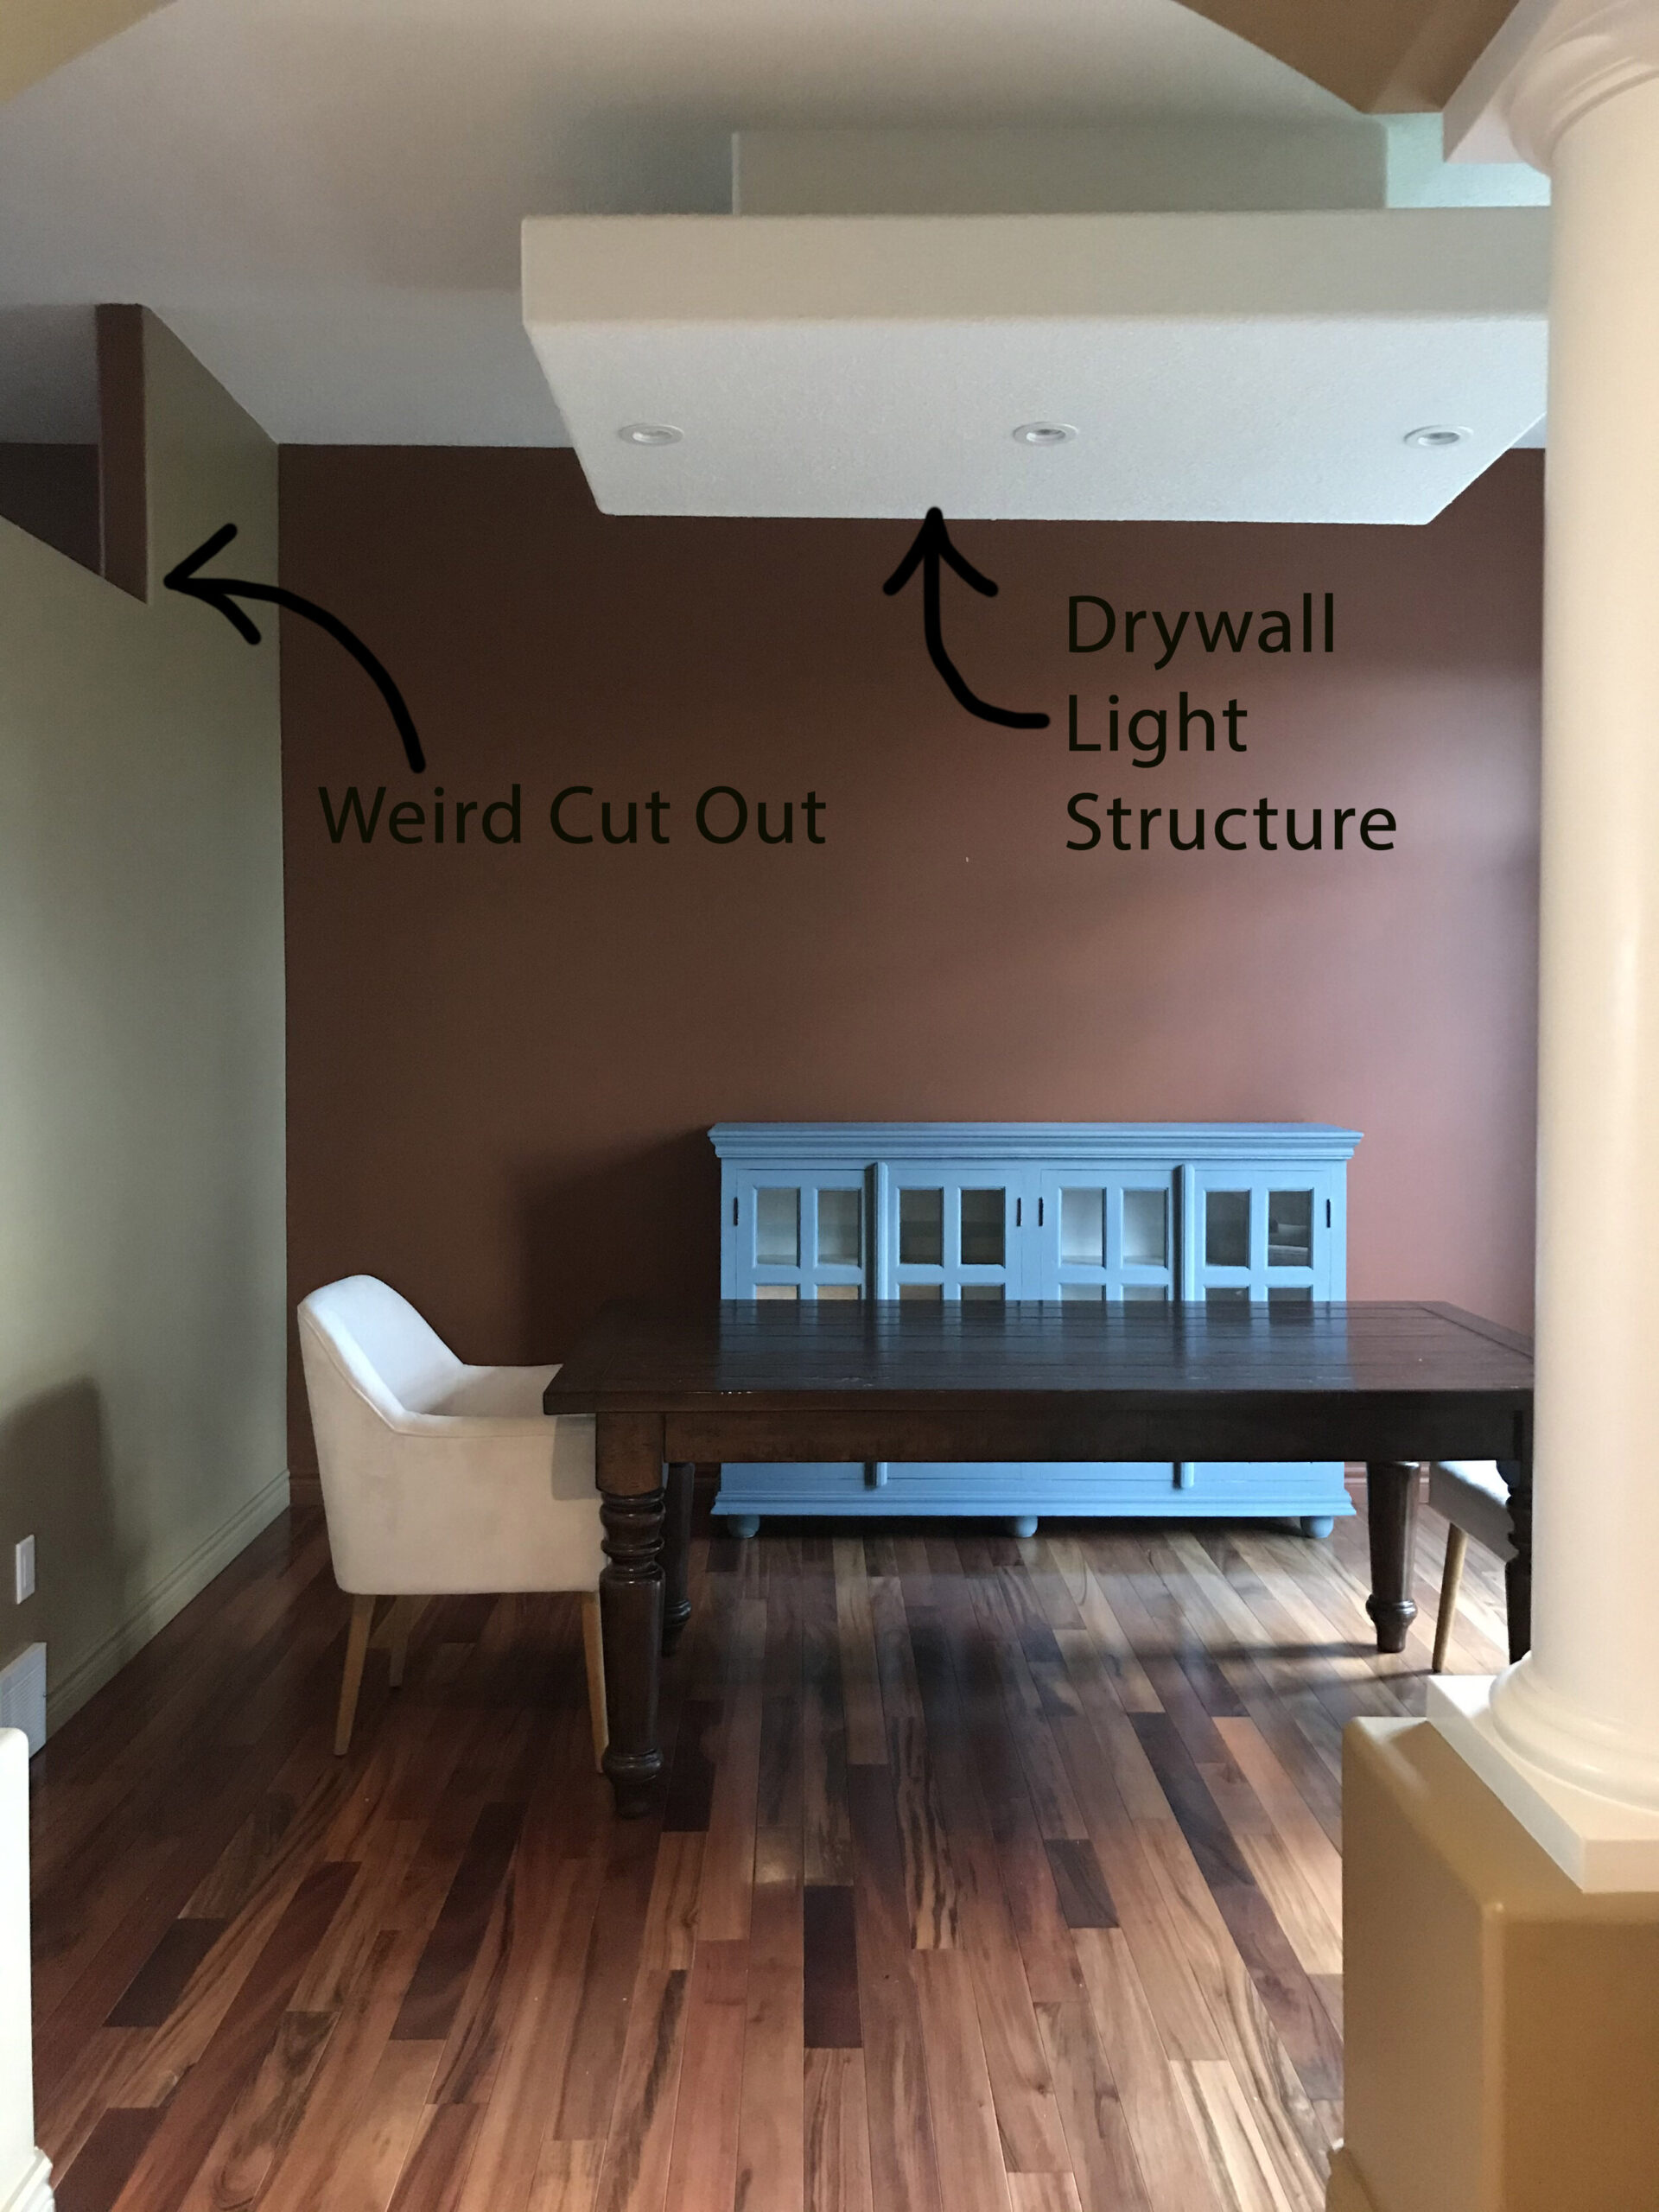 Dining room with minimal furniture with text indicating "weird cut out" with an arrow pointing to a hole in the wall on the left, and "drywall light structure" pointing to a box on the ceiling that is constructed out of drywall with pot lights in it